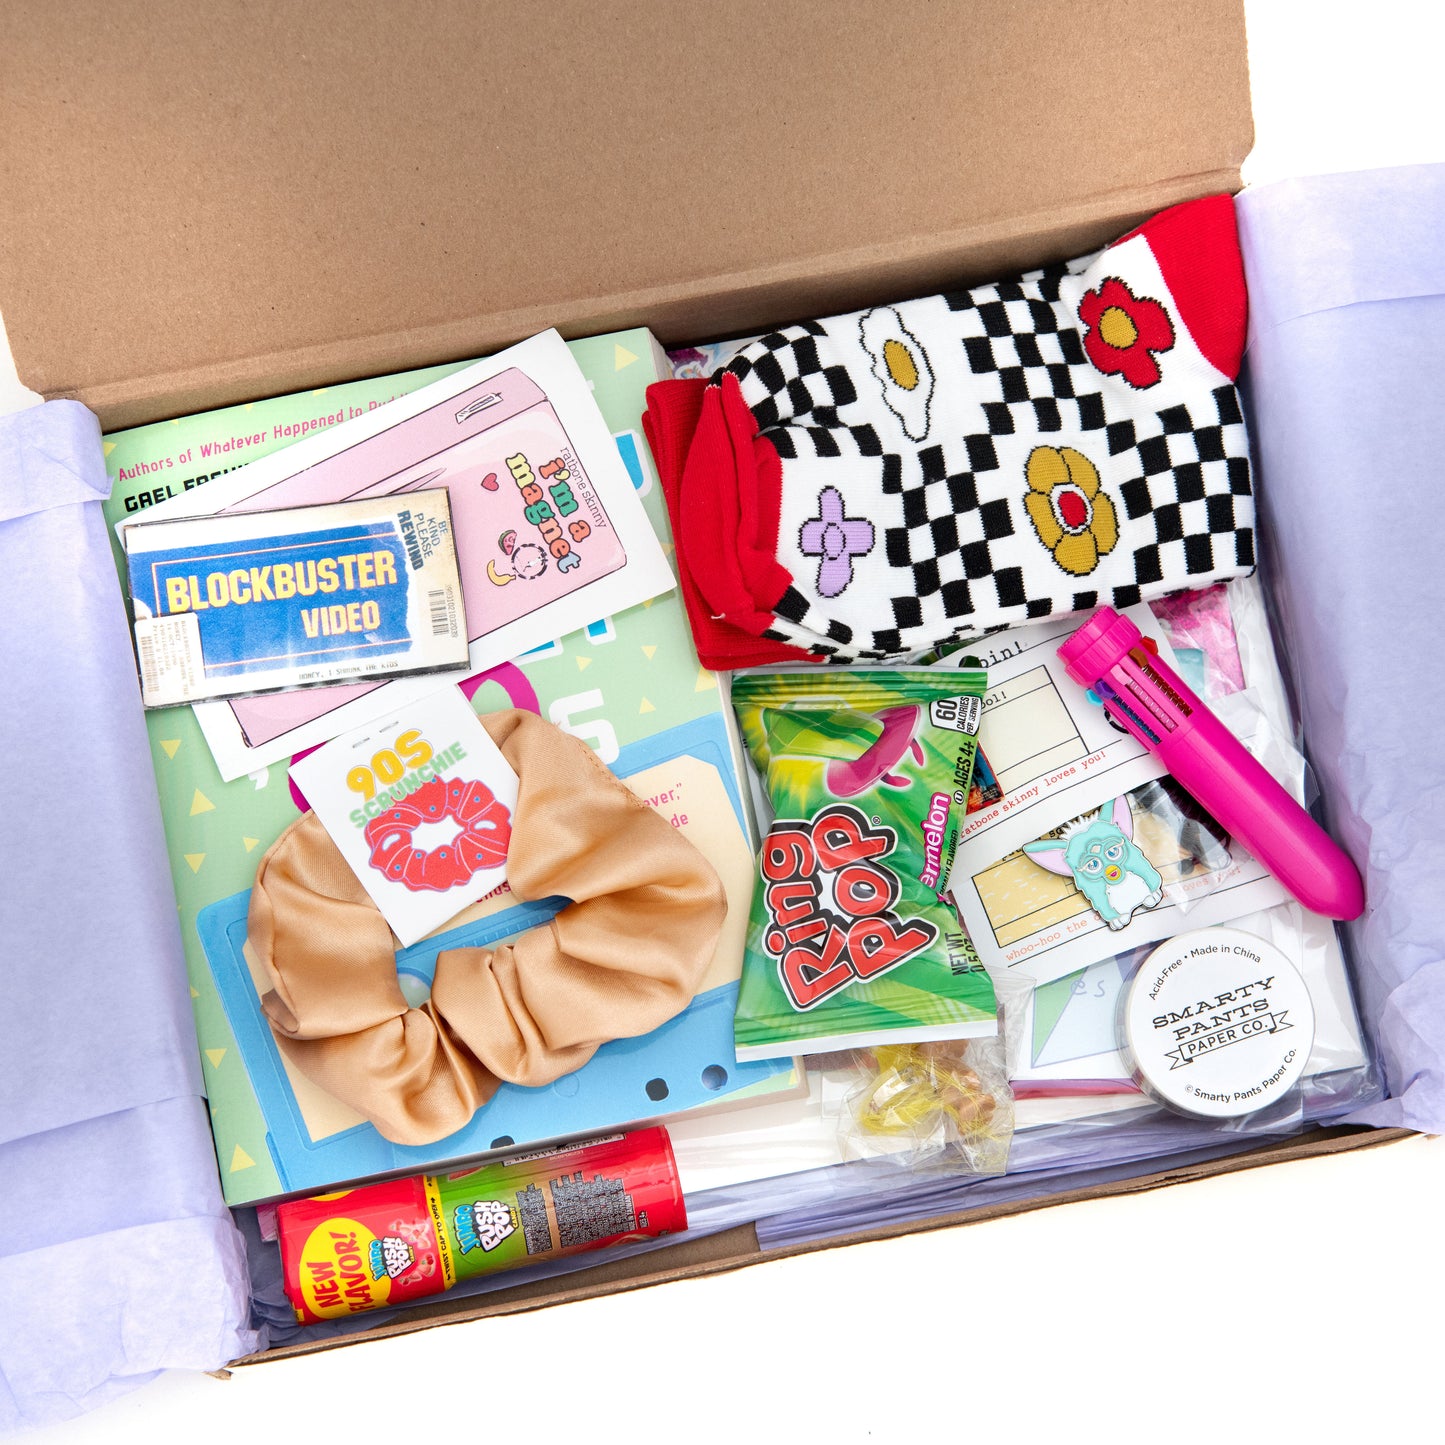 Get your 90s nostalgia fix with The Oddball Club's subscription box! This month's box features a funky pair of socks, colorful scrunchie, adorable furby enamel pin, and iconic blockbuster magnet. Don't miss out on reliving the good old days with this awesome collection of throwback items.